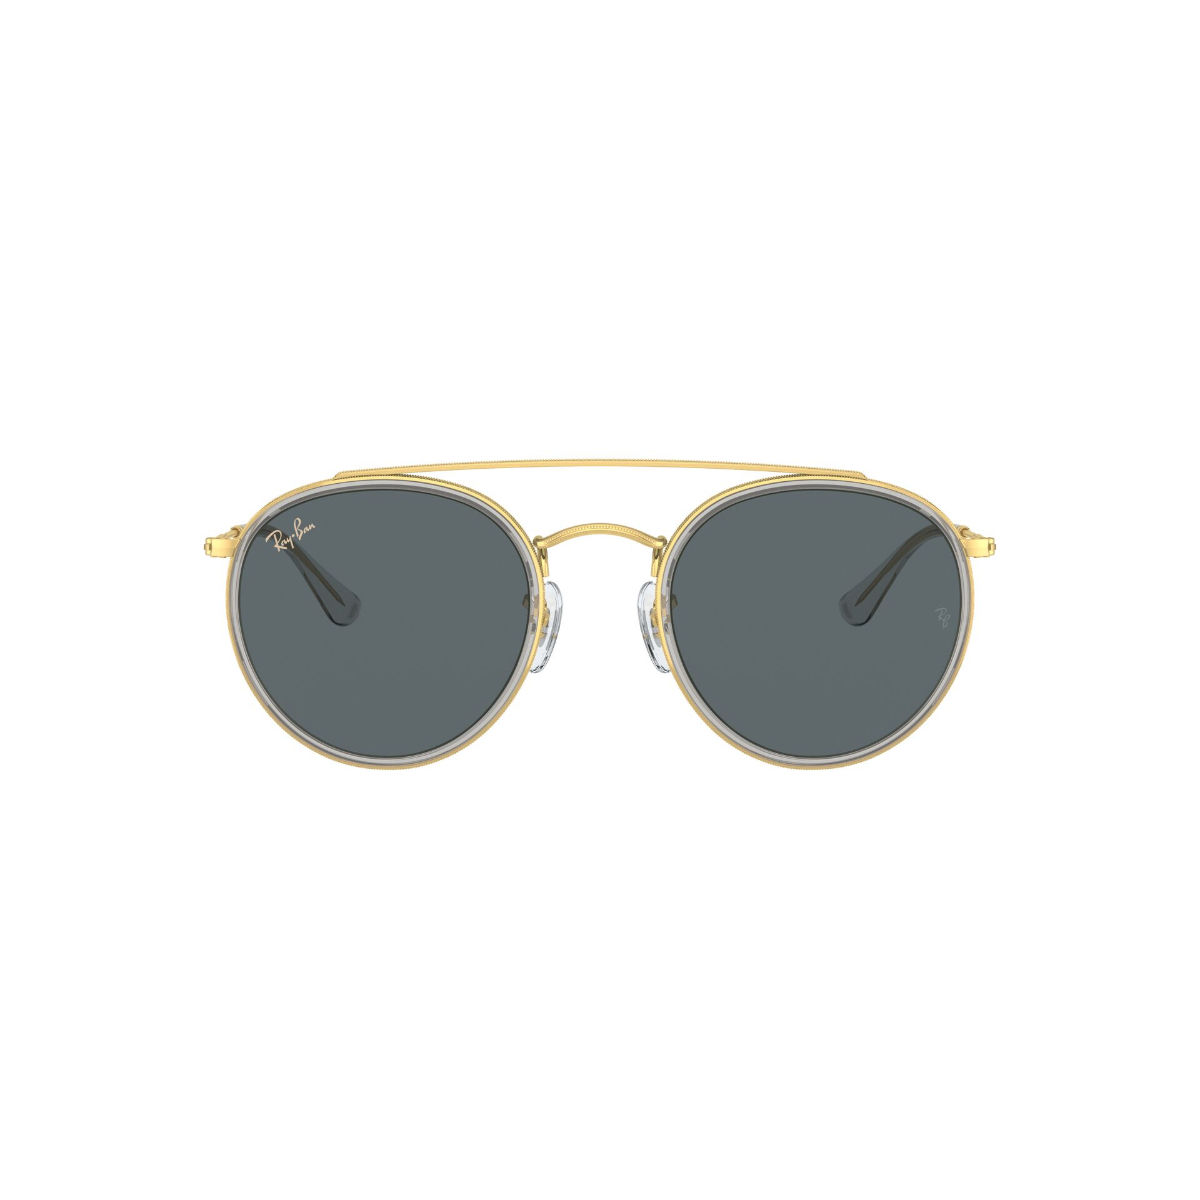 Ray-Ban 0RB3647N Light Grey Icons Round Sunglasses (51 mm): Buy Ray-Ban  0RB3647N Light Grey Icons Round Sunglasses (51 mm) Online at Best Price in  India | Nykaa